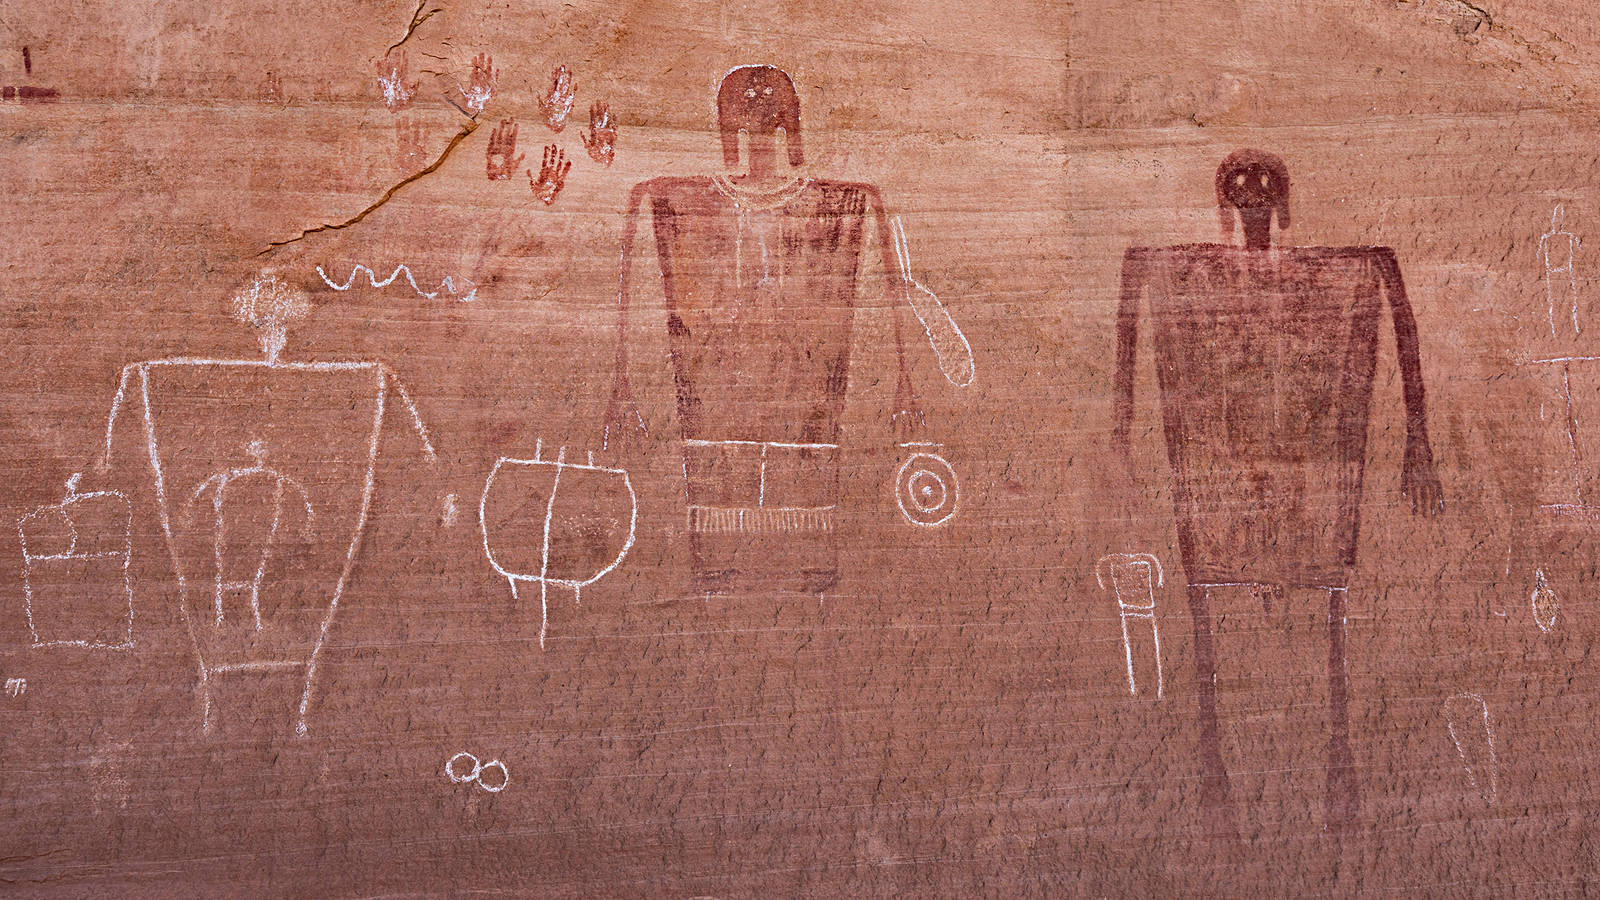 <h3 style="text-align: center; padding: 50px;"><span class="text-Intro-style">The Big Man Panel, located in Bears Ears, features reddish pictographs of human figures. <br />Visitors traced faint petroglyphs with chalk.<br />© STEPHEN ALVAREZ</span></h3>